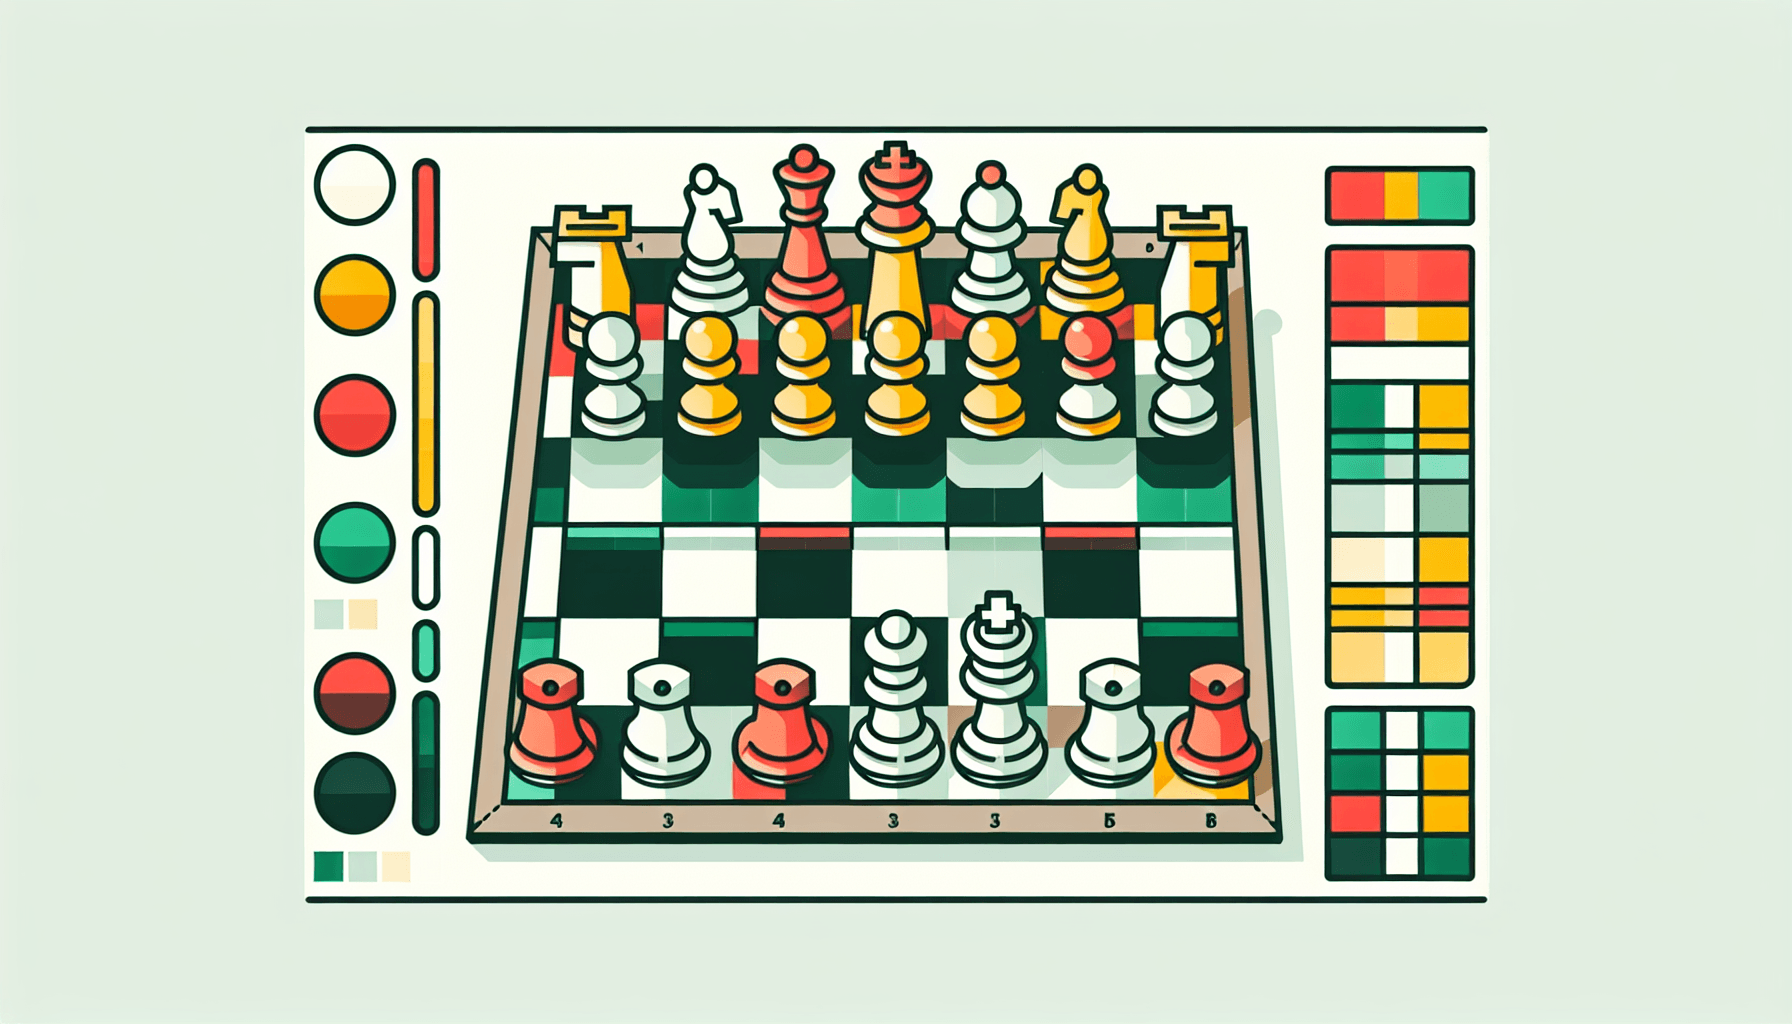 Chessboard in flat illustration style and white background, red #f47574, green #88c7a8, yellow #fcc44b, and blue #645bc8 colors.